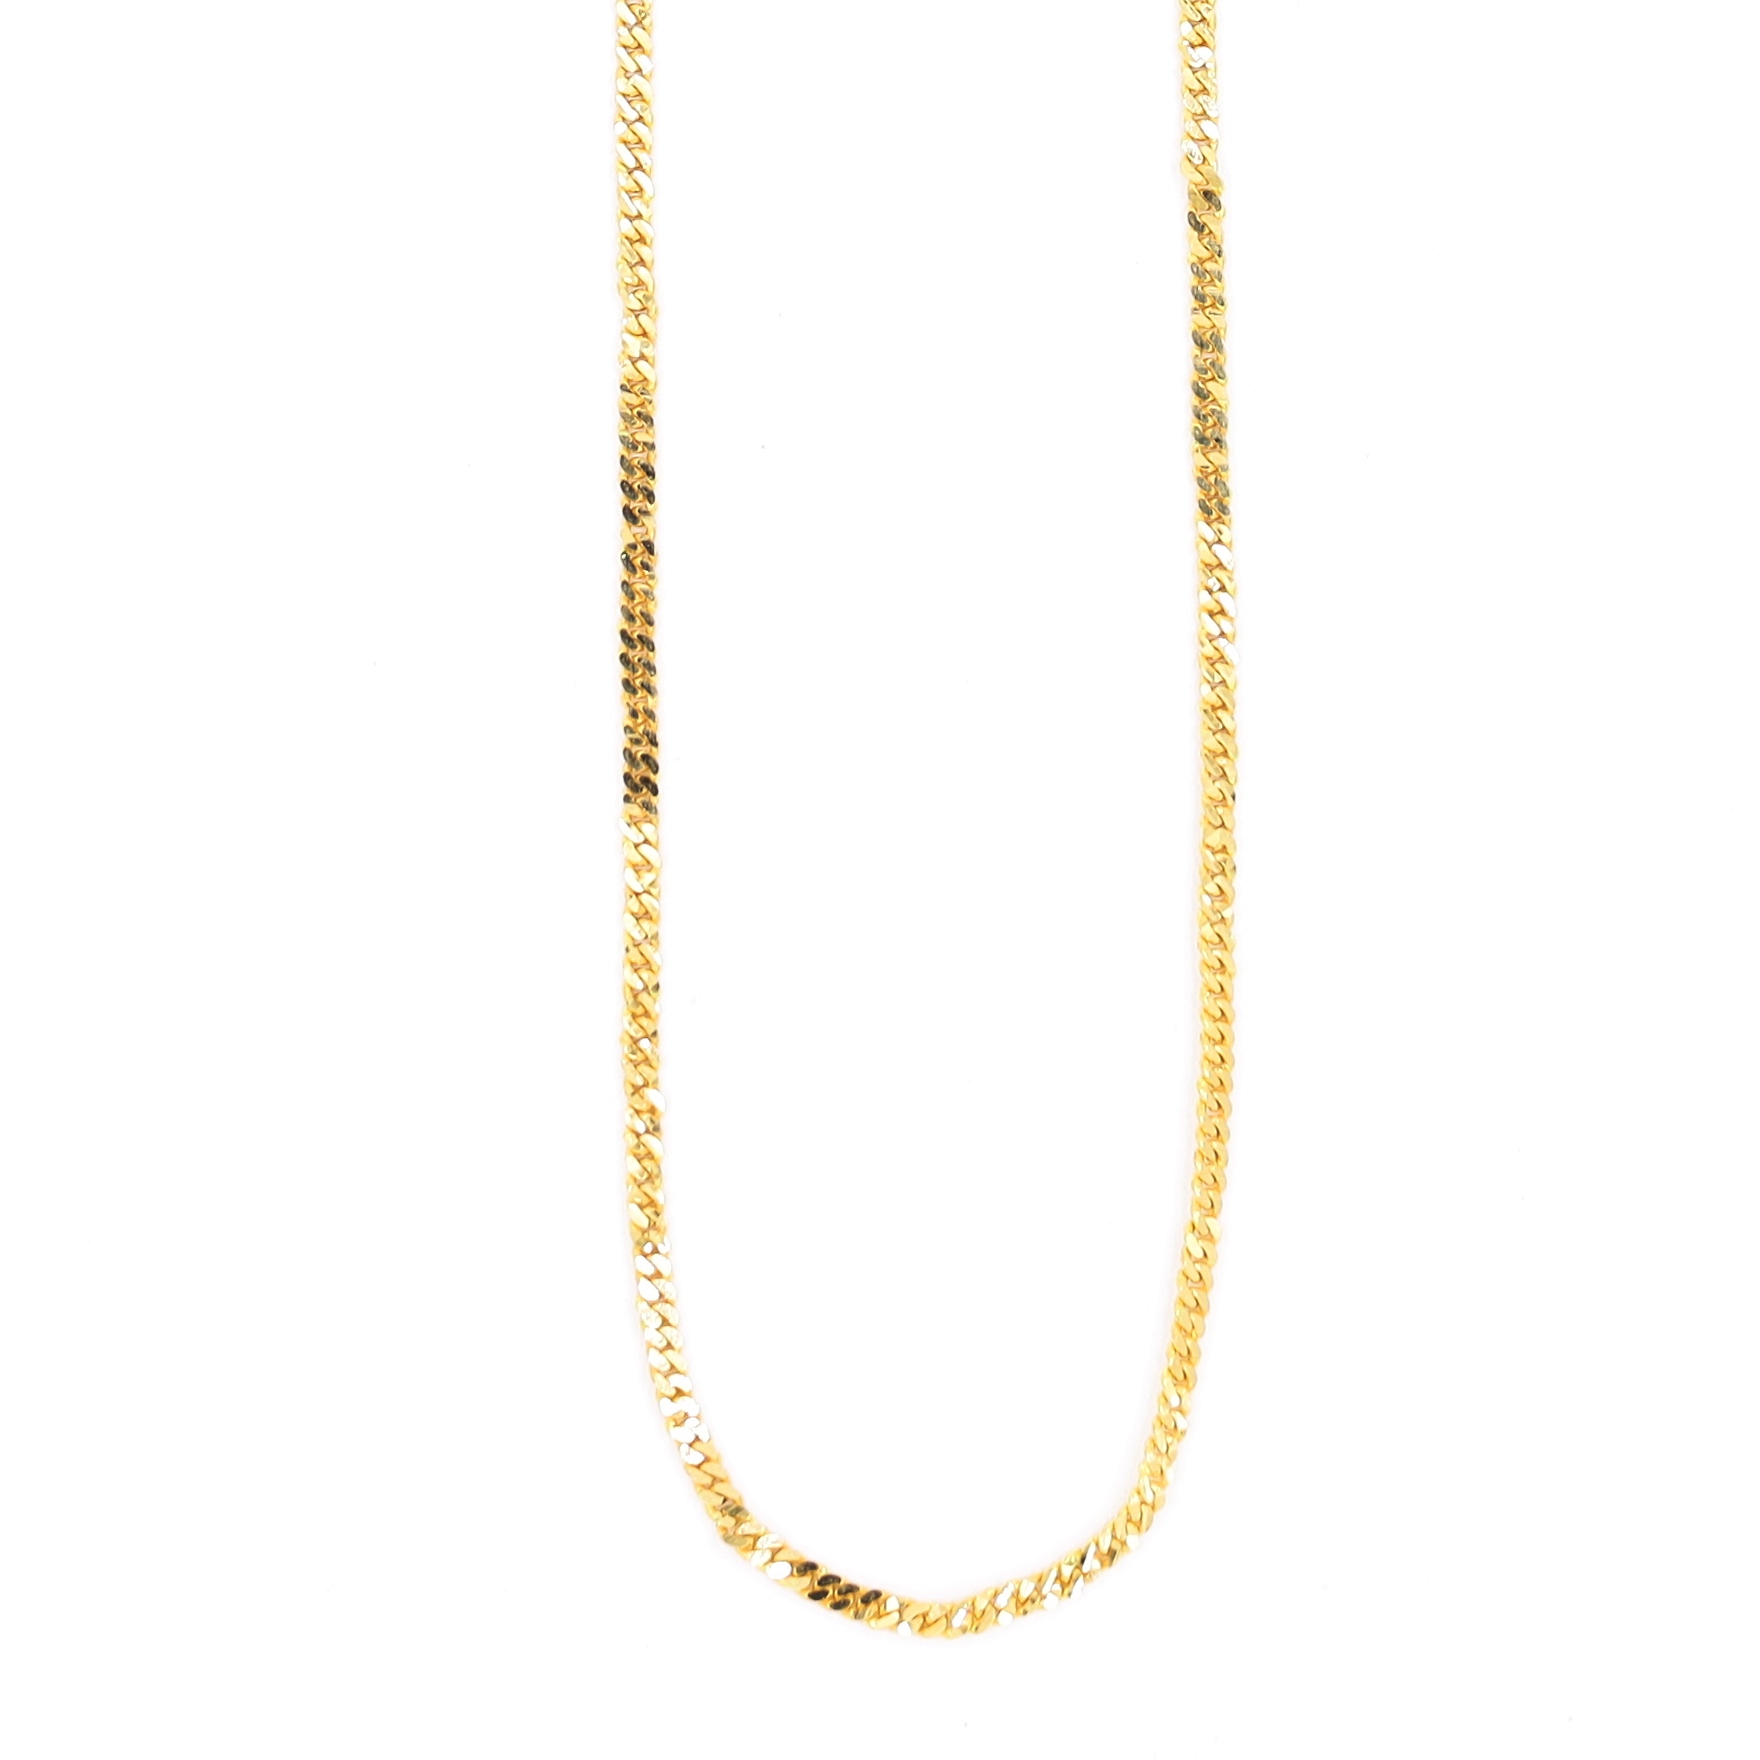 Enticing Handmade Gold Chain For Men